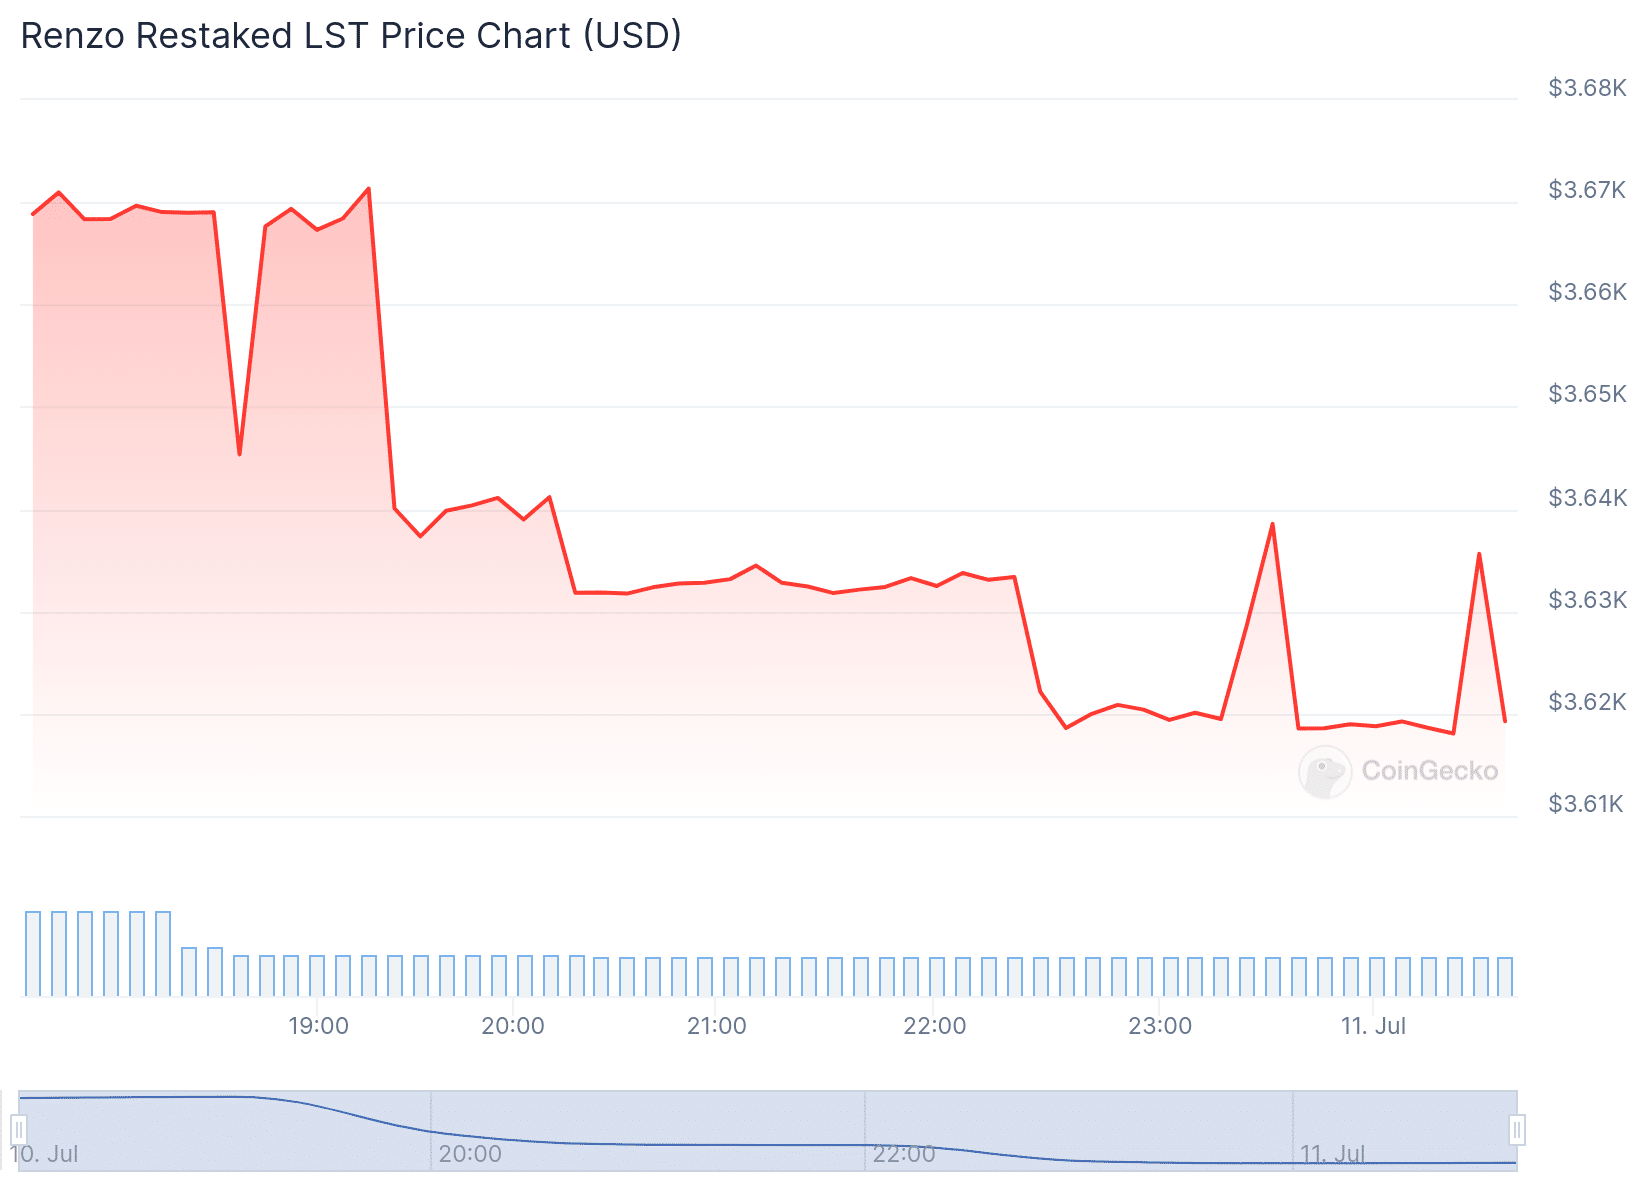 Renzo Restaked LST Price Chart